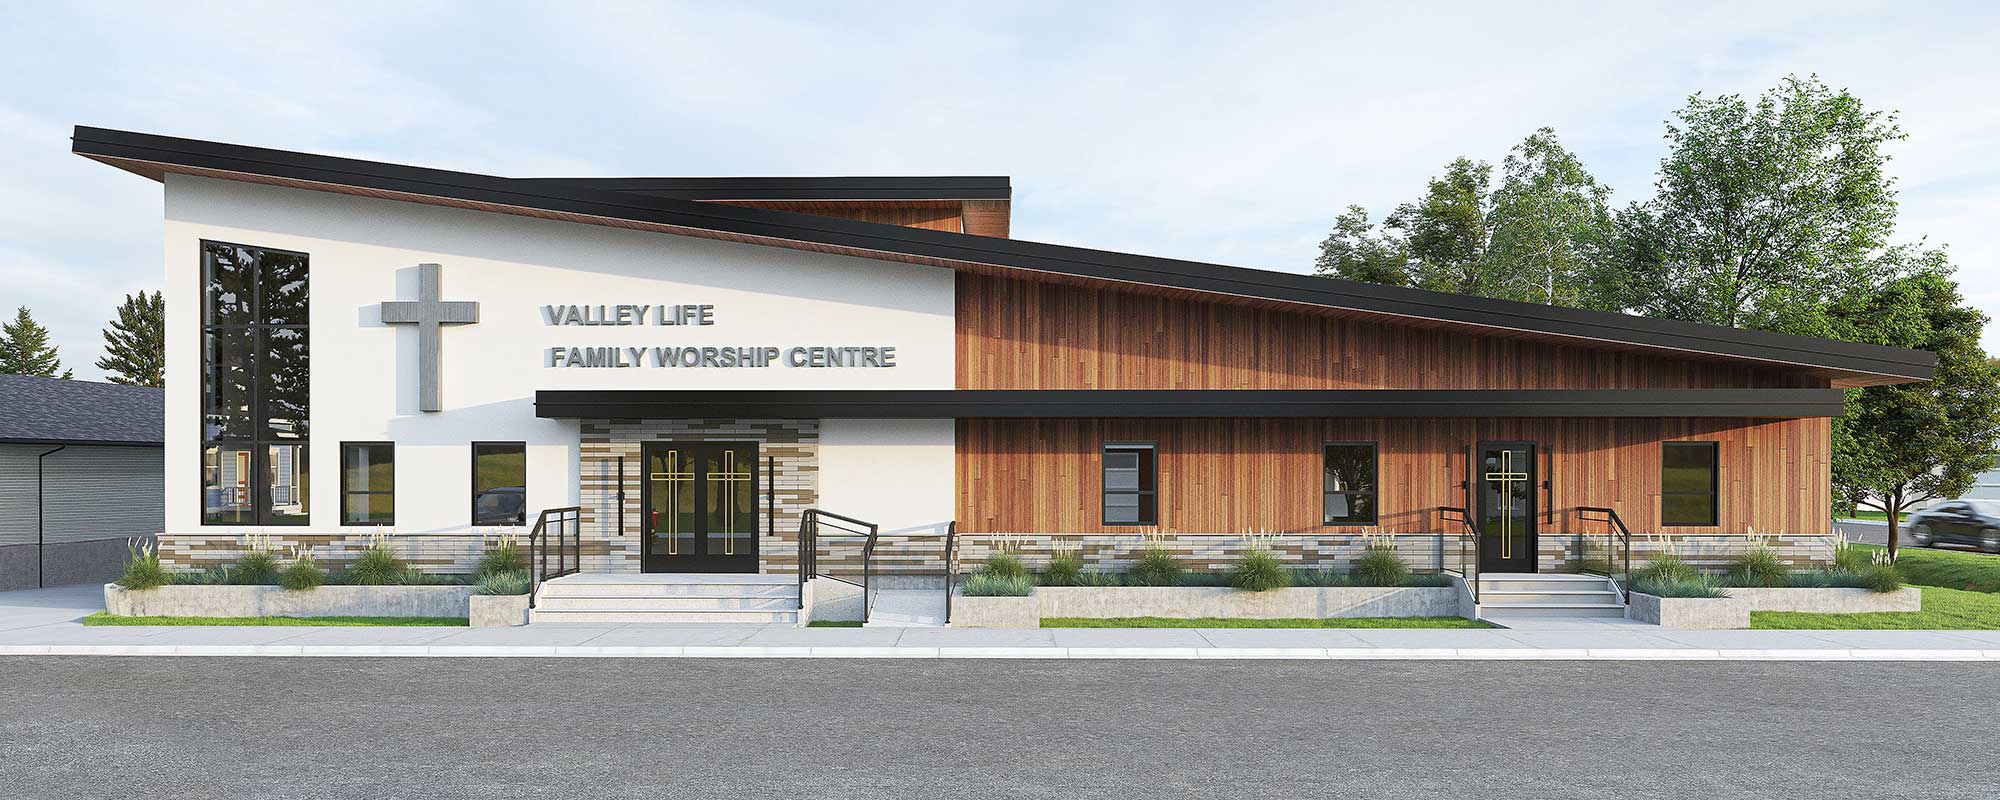 Exterior rendering of the Valley Life Family Worship Centre, Minnedosa, Manitoba